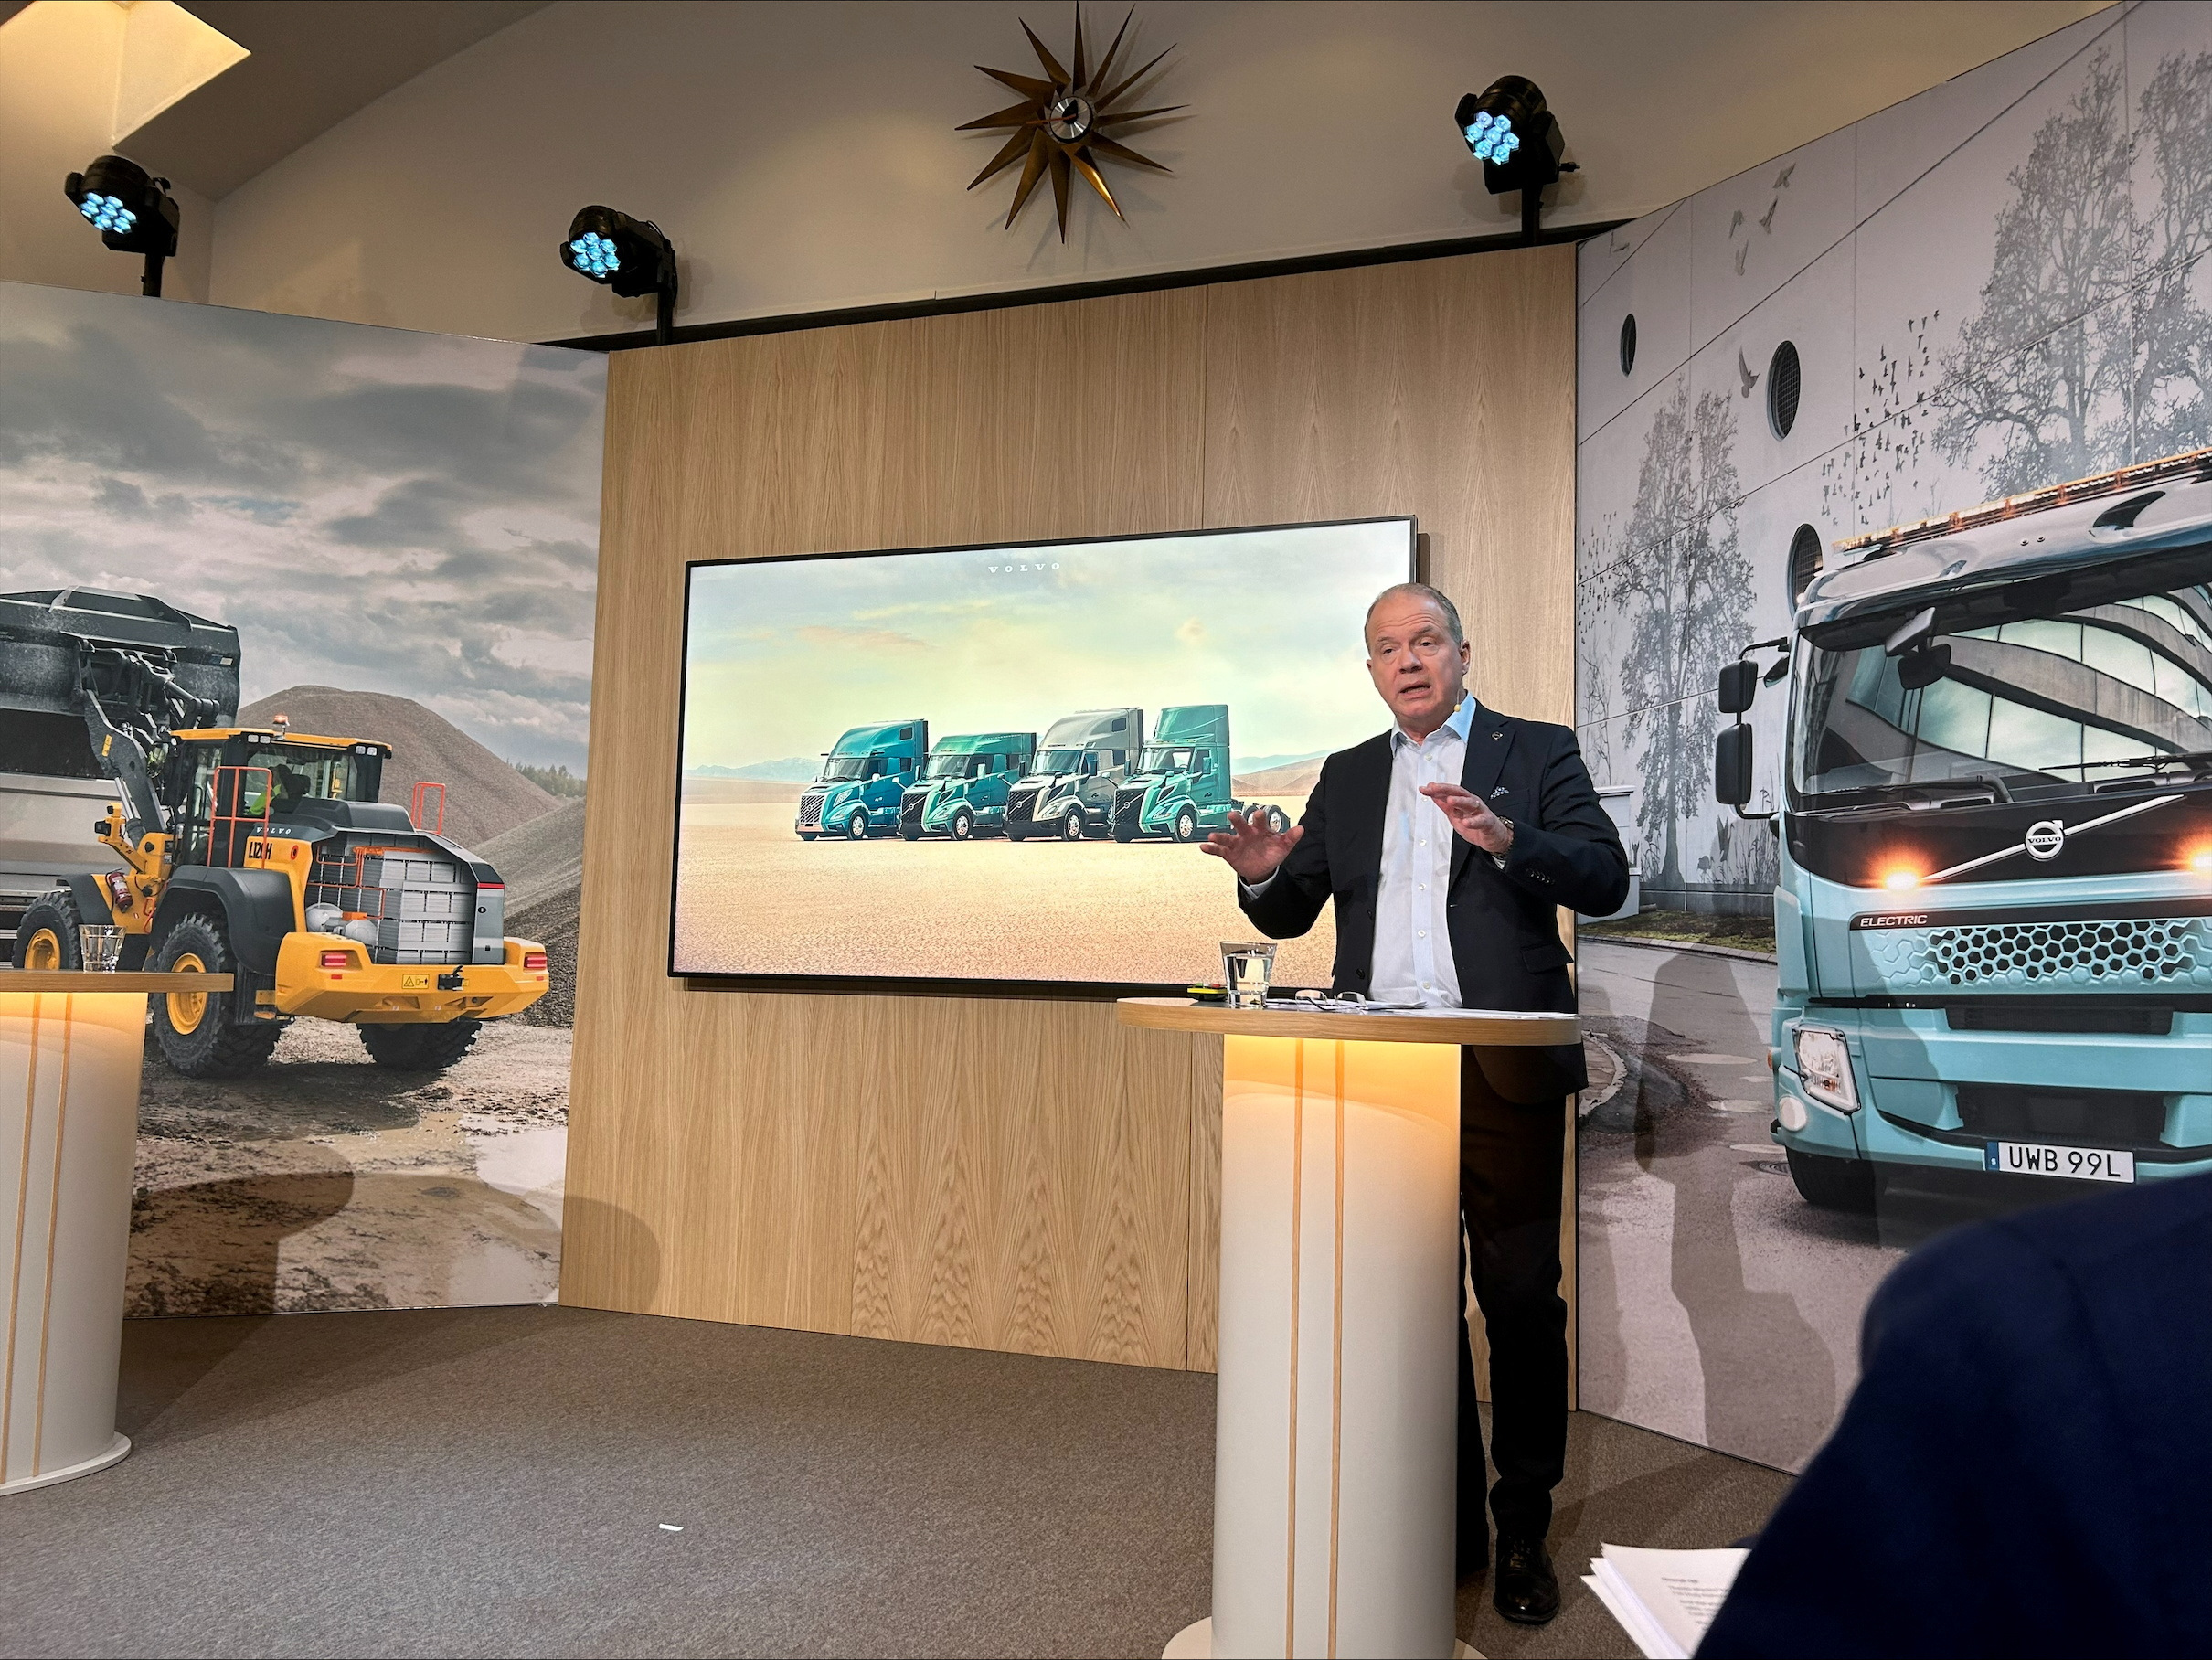 We are an official service partner of Volvo Trucks